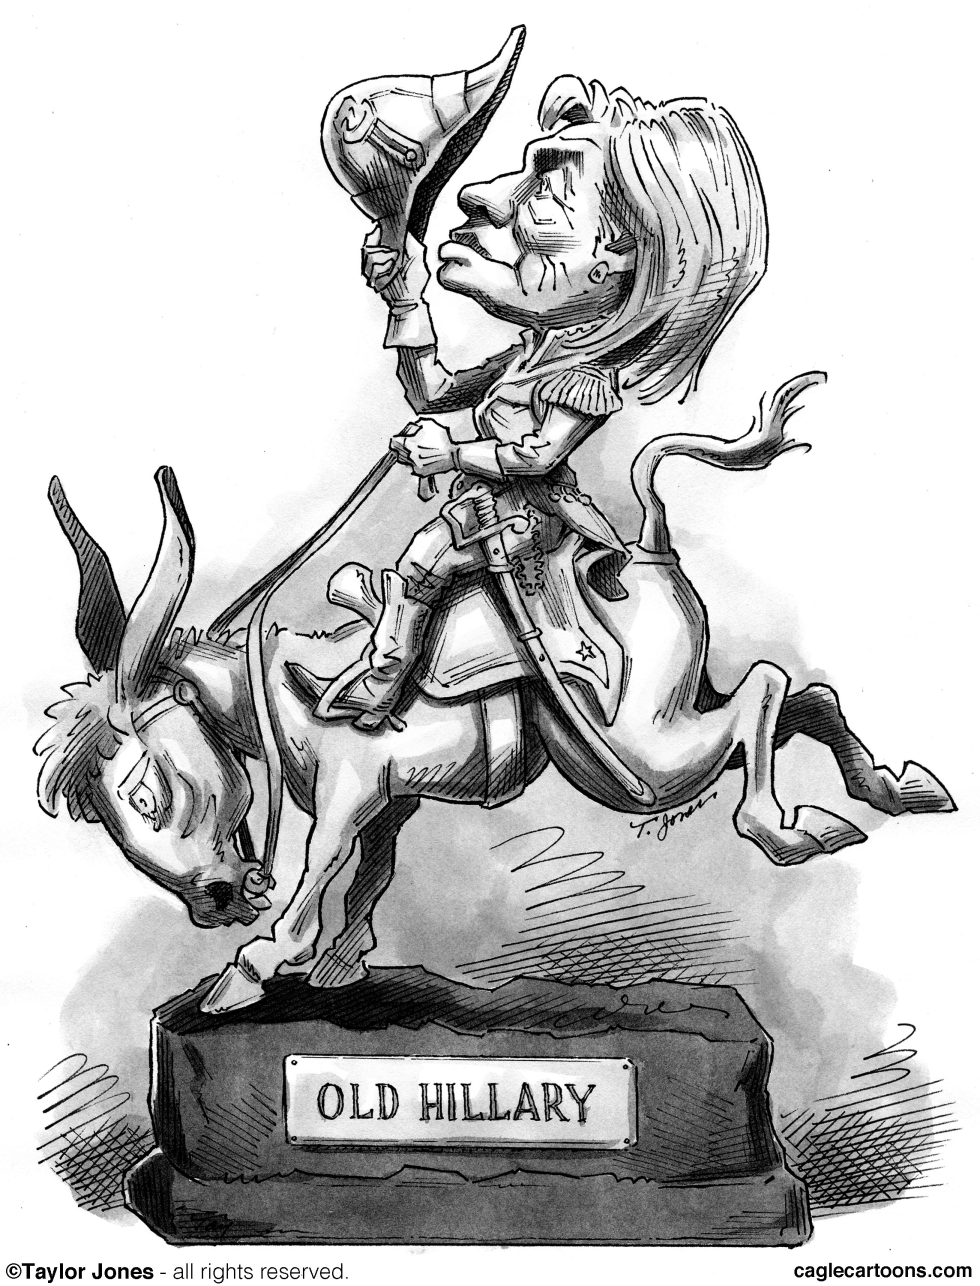 OLD HILLARY by Taylor Jones